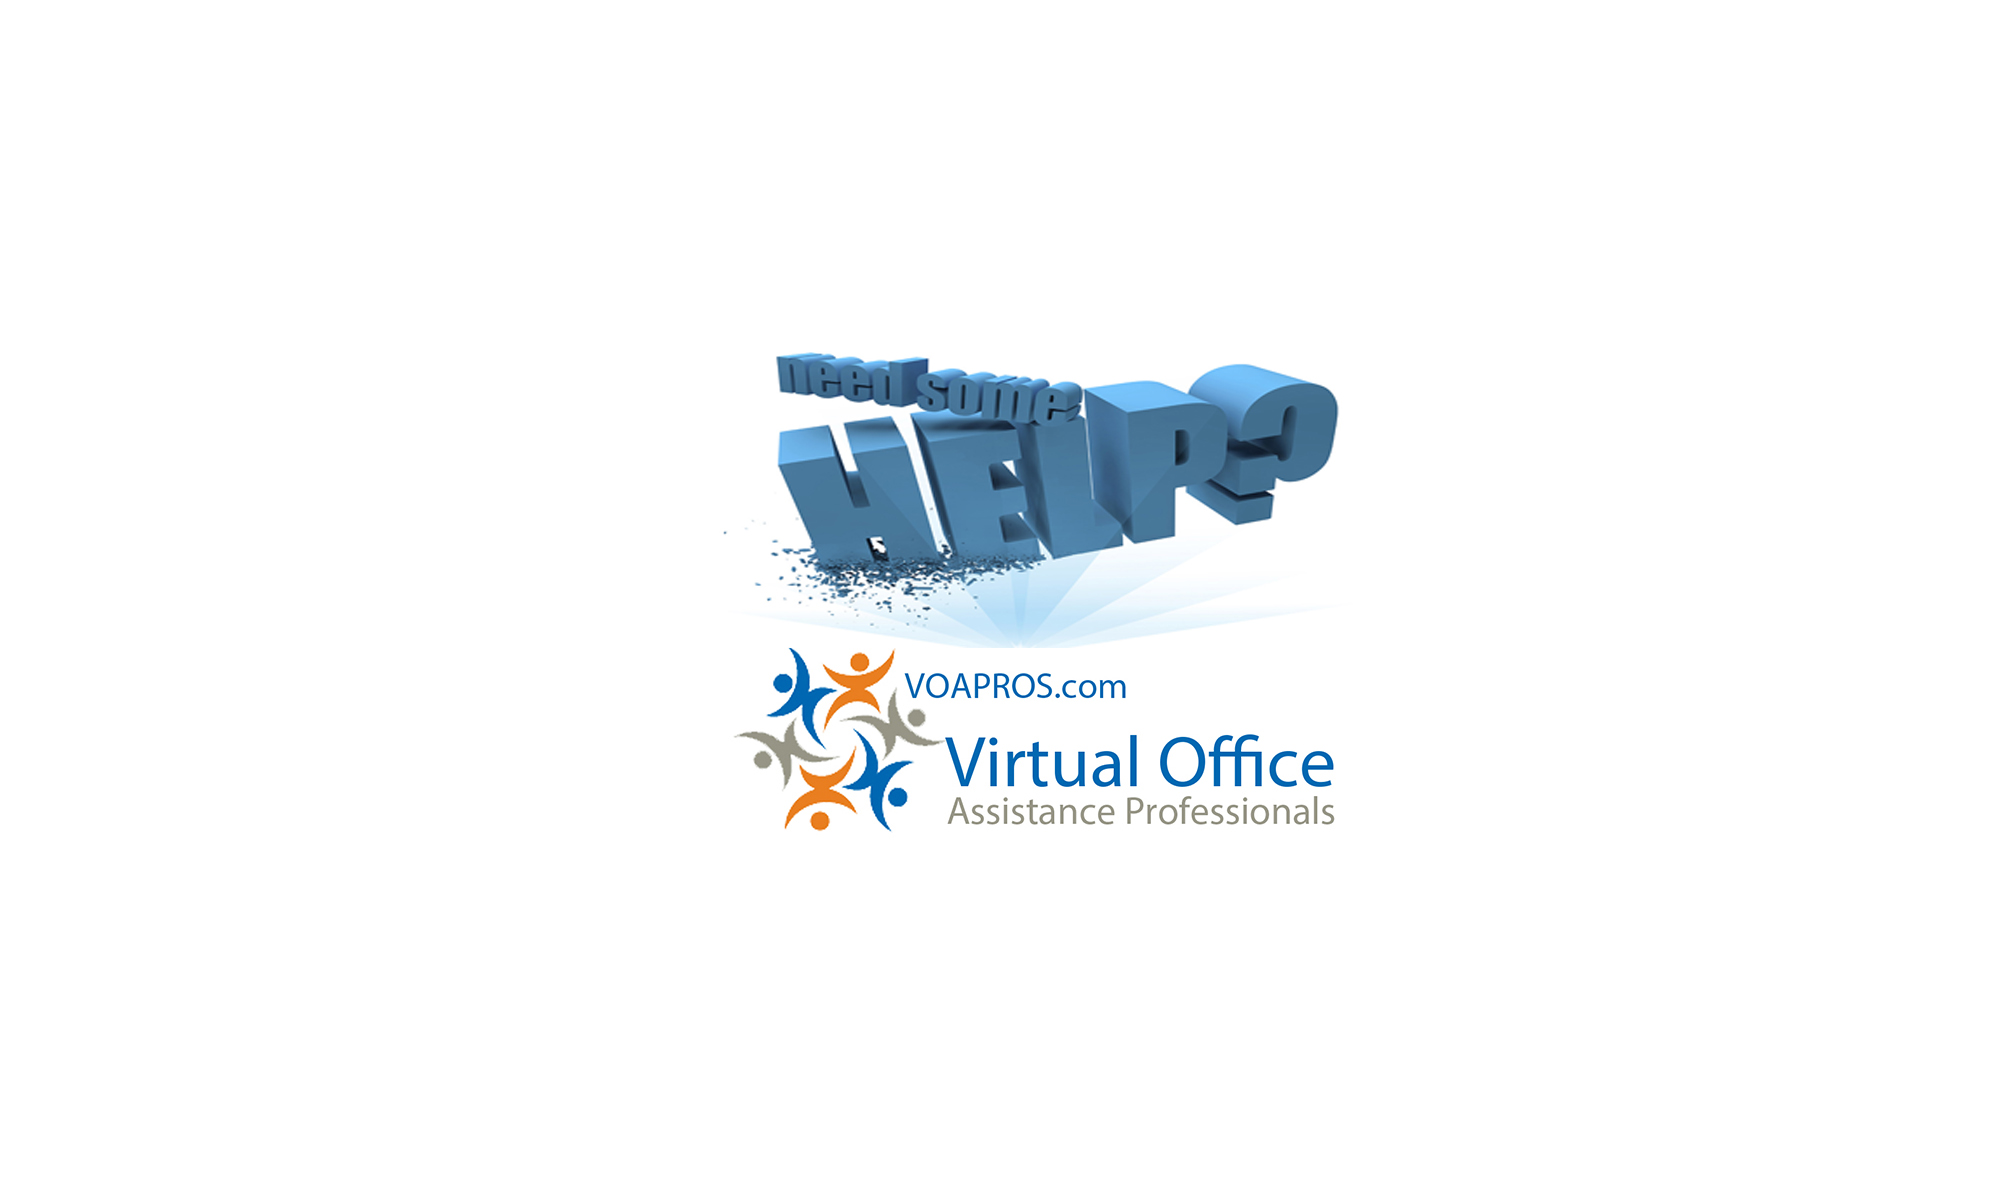 Need some help? Virtual Office Assistance Professionals